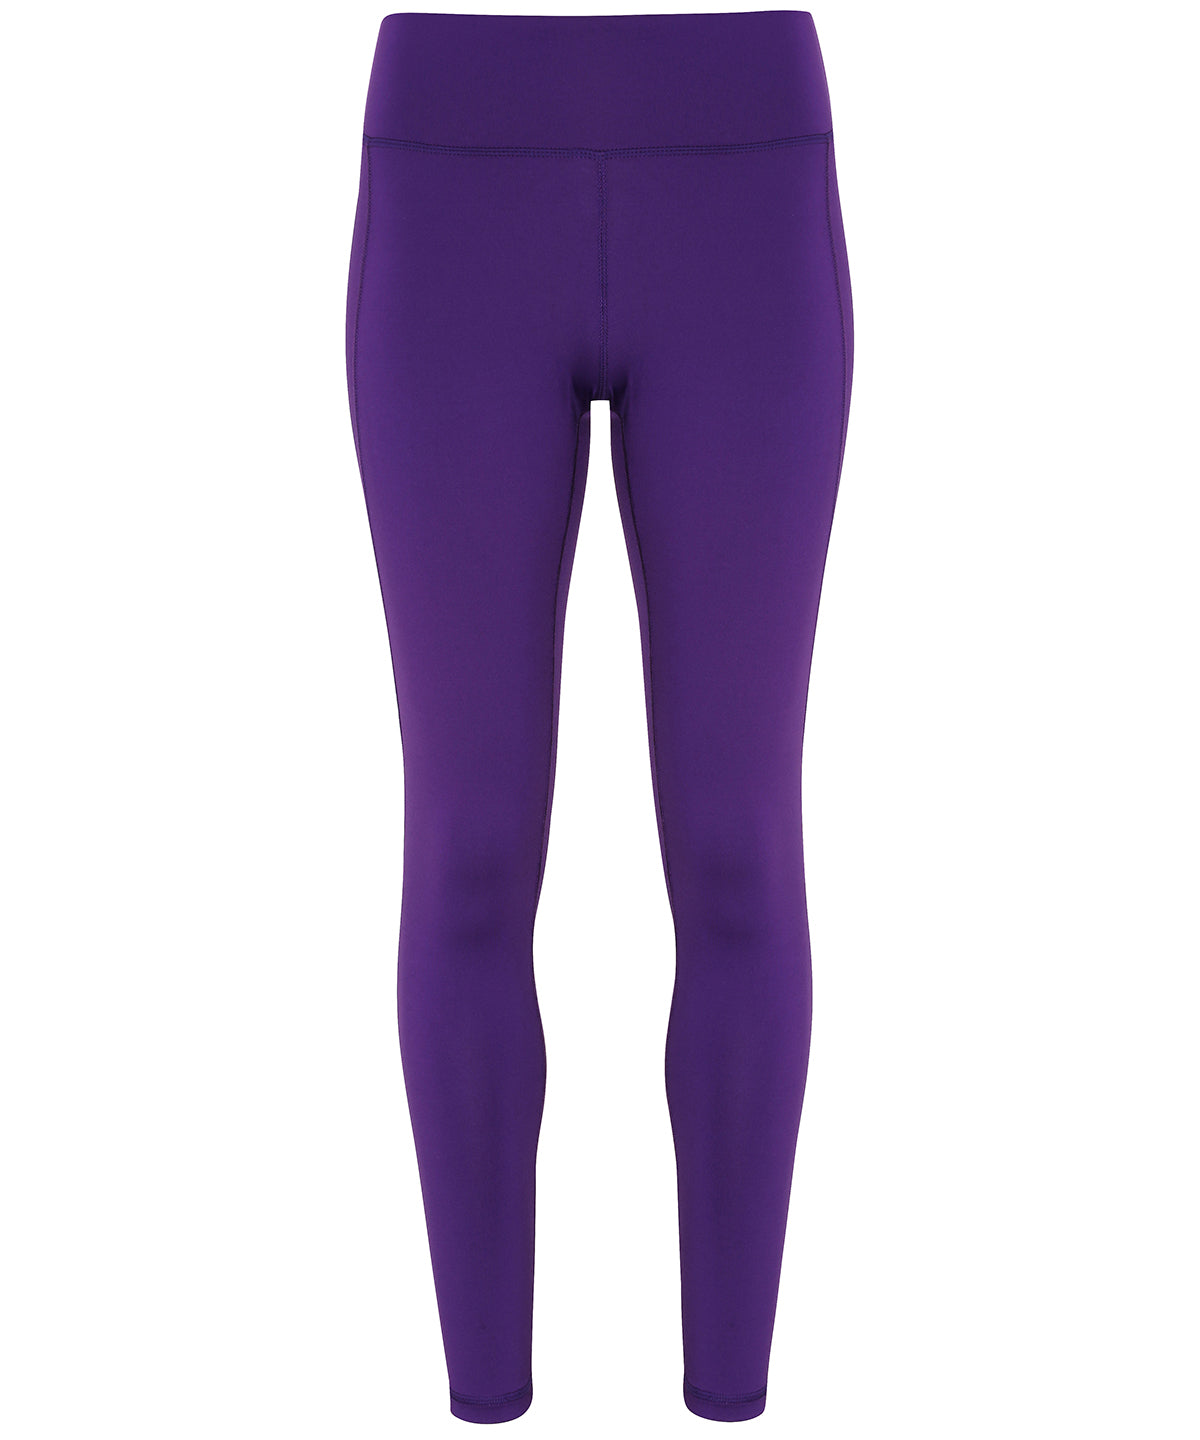 Purple - Women's TriDri® performance leggings Leggings TriDri® Activewear & Performance, Athleisurewear, Back to the Gym, Exclusives, Leggings, Lounge Sets, Must Haves, On-Trend Activewear, Outdoor Sports, Rebrandable, Sports & Leisure, Team Sportswear, Trousers & Shorts, UPF Protection Schoolwear Centres